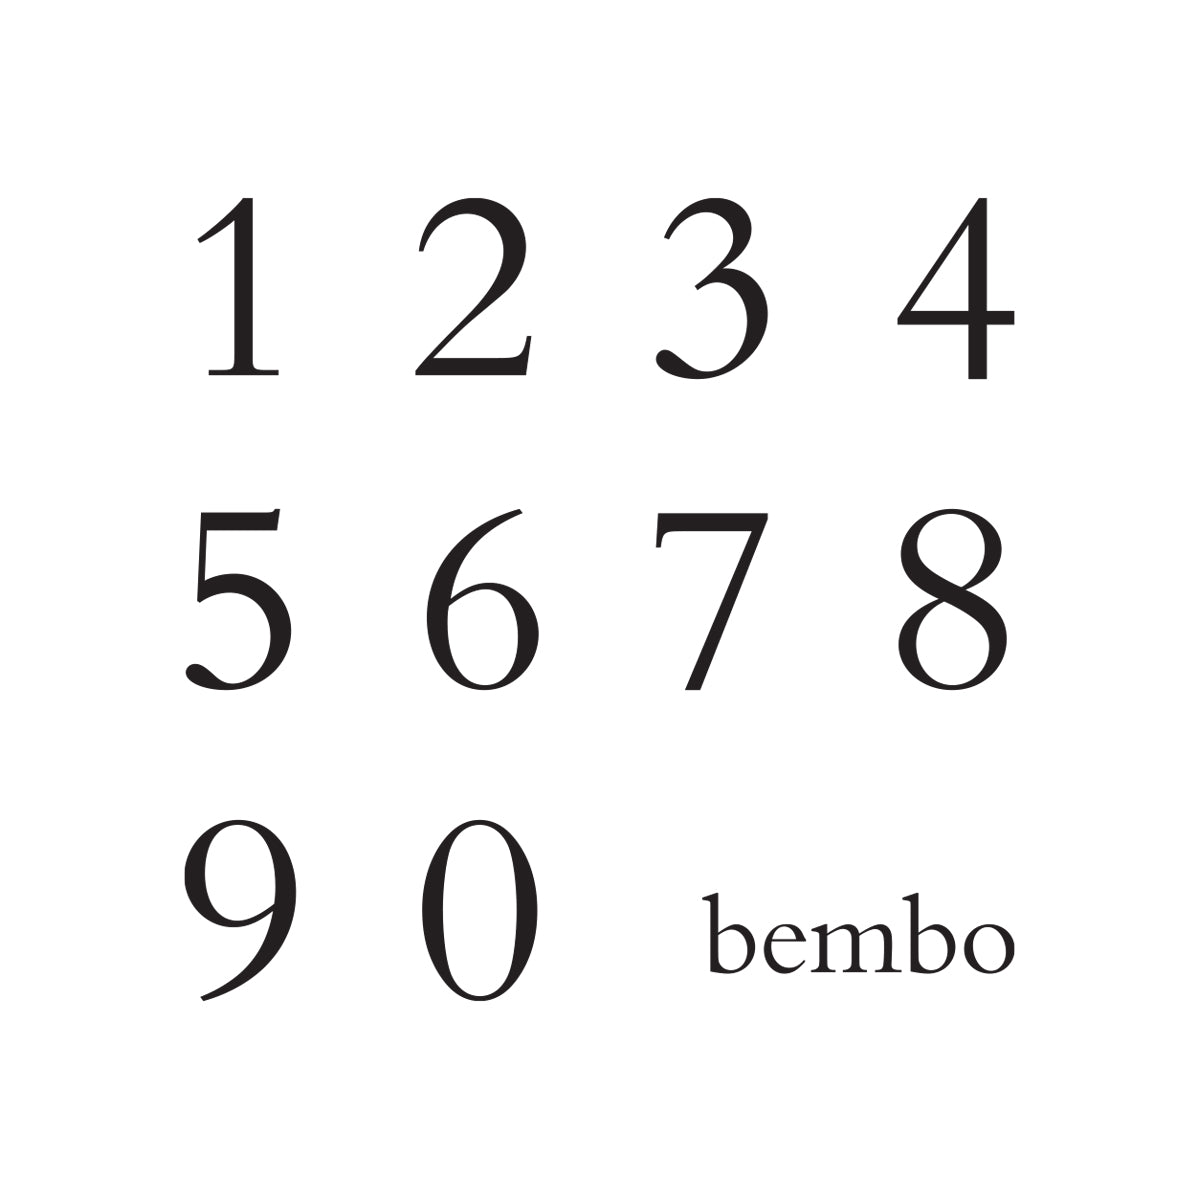 Oval-Bembo Number.